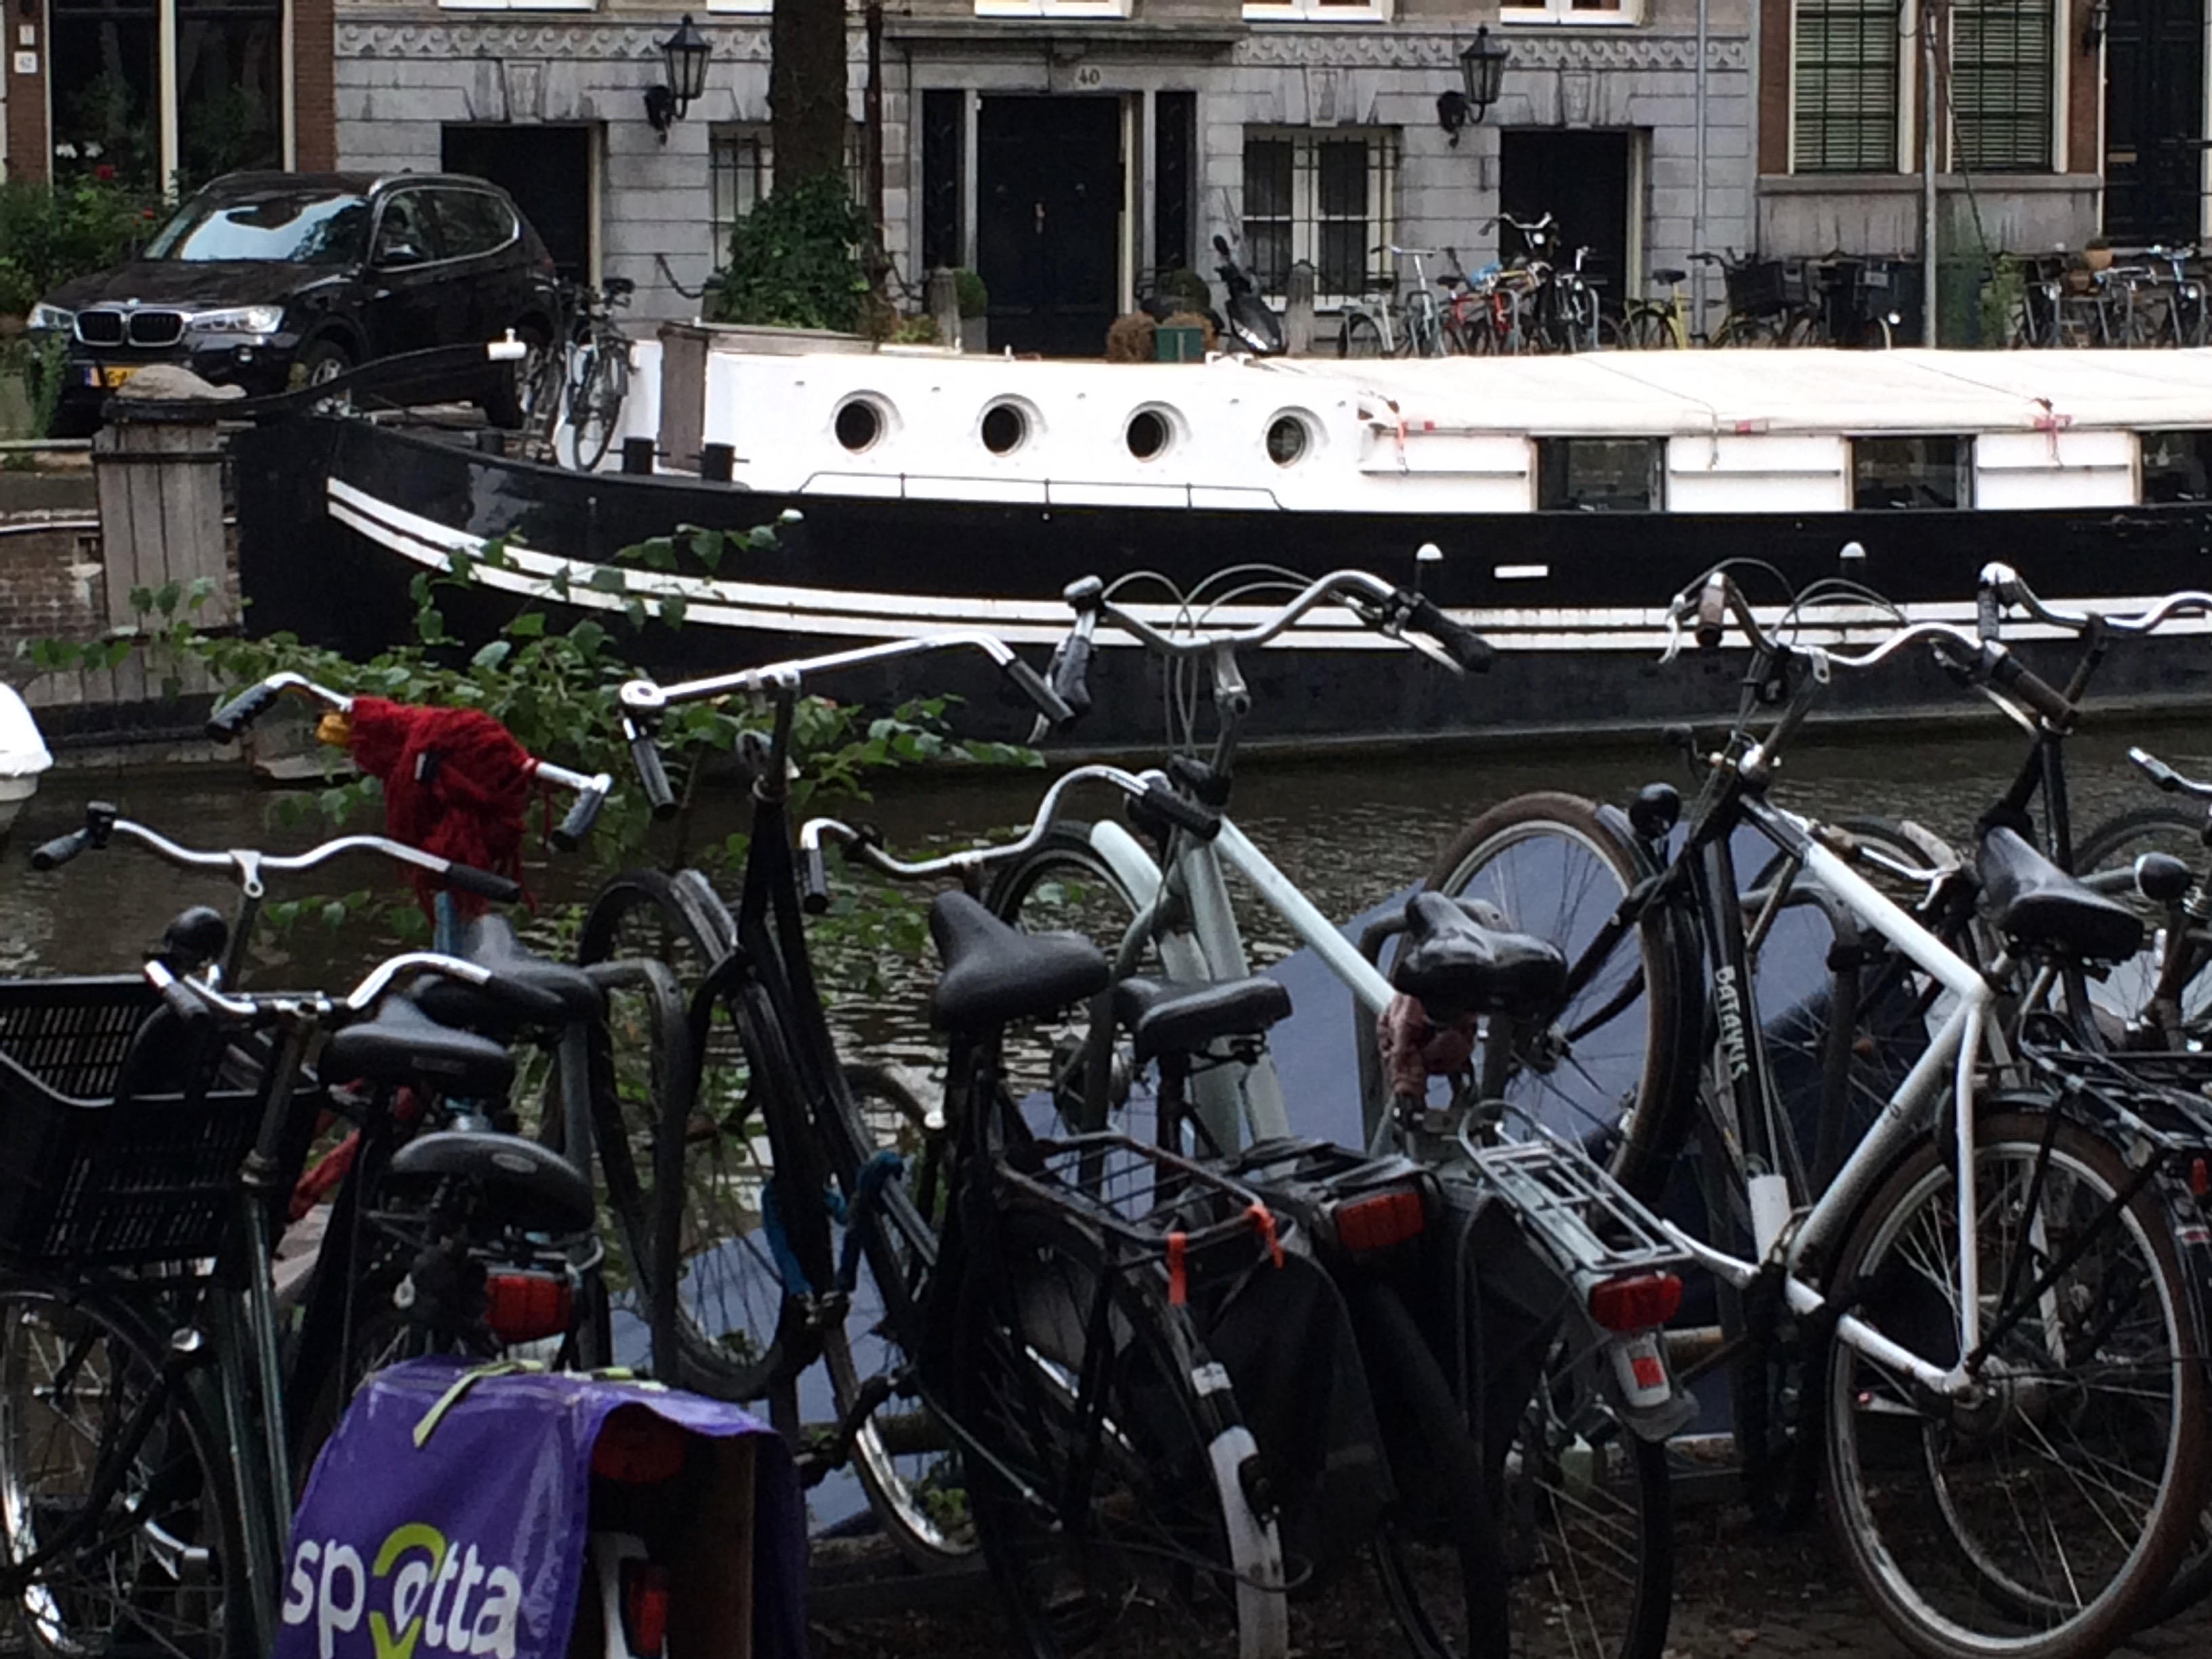 canal boat and bikes